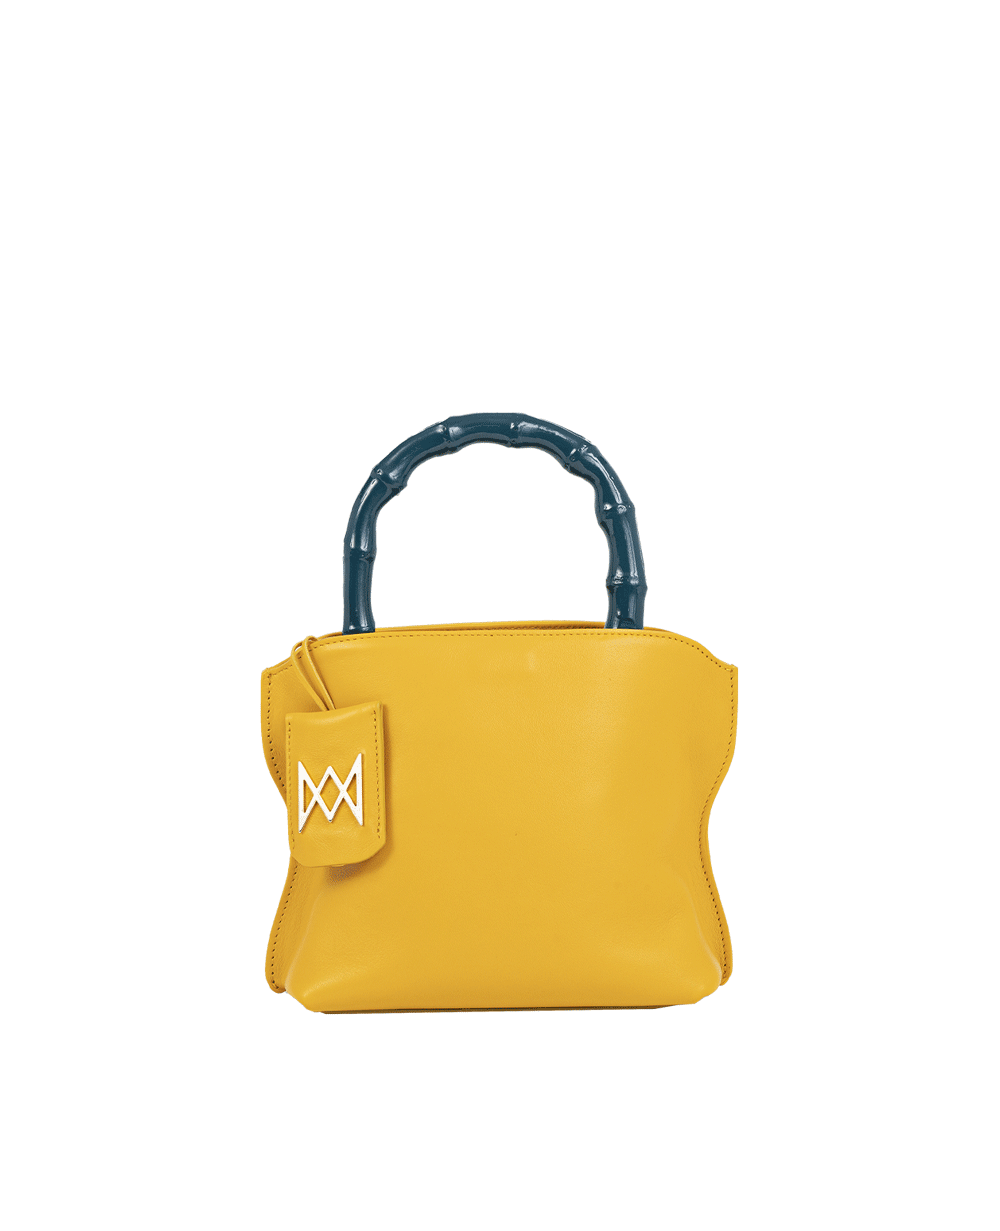 Cross-body bag in calf leather with detachable shoulder strap. Bamboo handles. Made In Italy. Two compartments, zip pocket in the back compartment. Magnetic flap closure with logo. Color: Saffron. Size: Medium